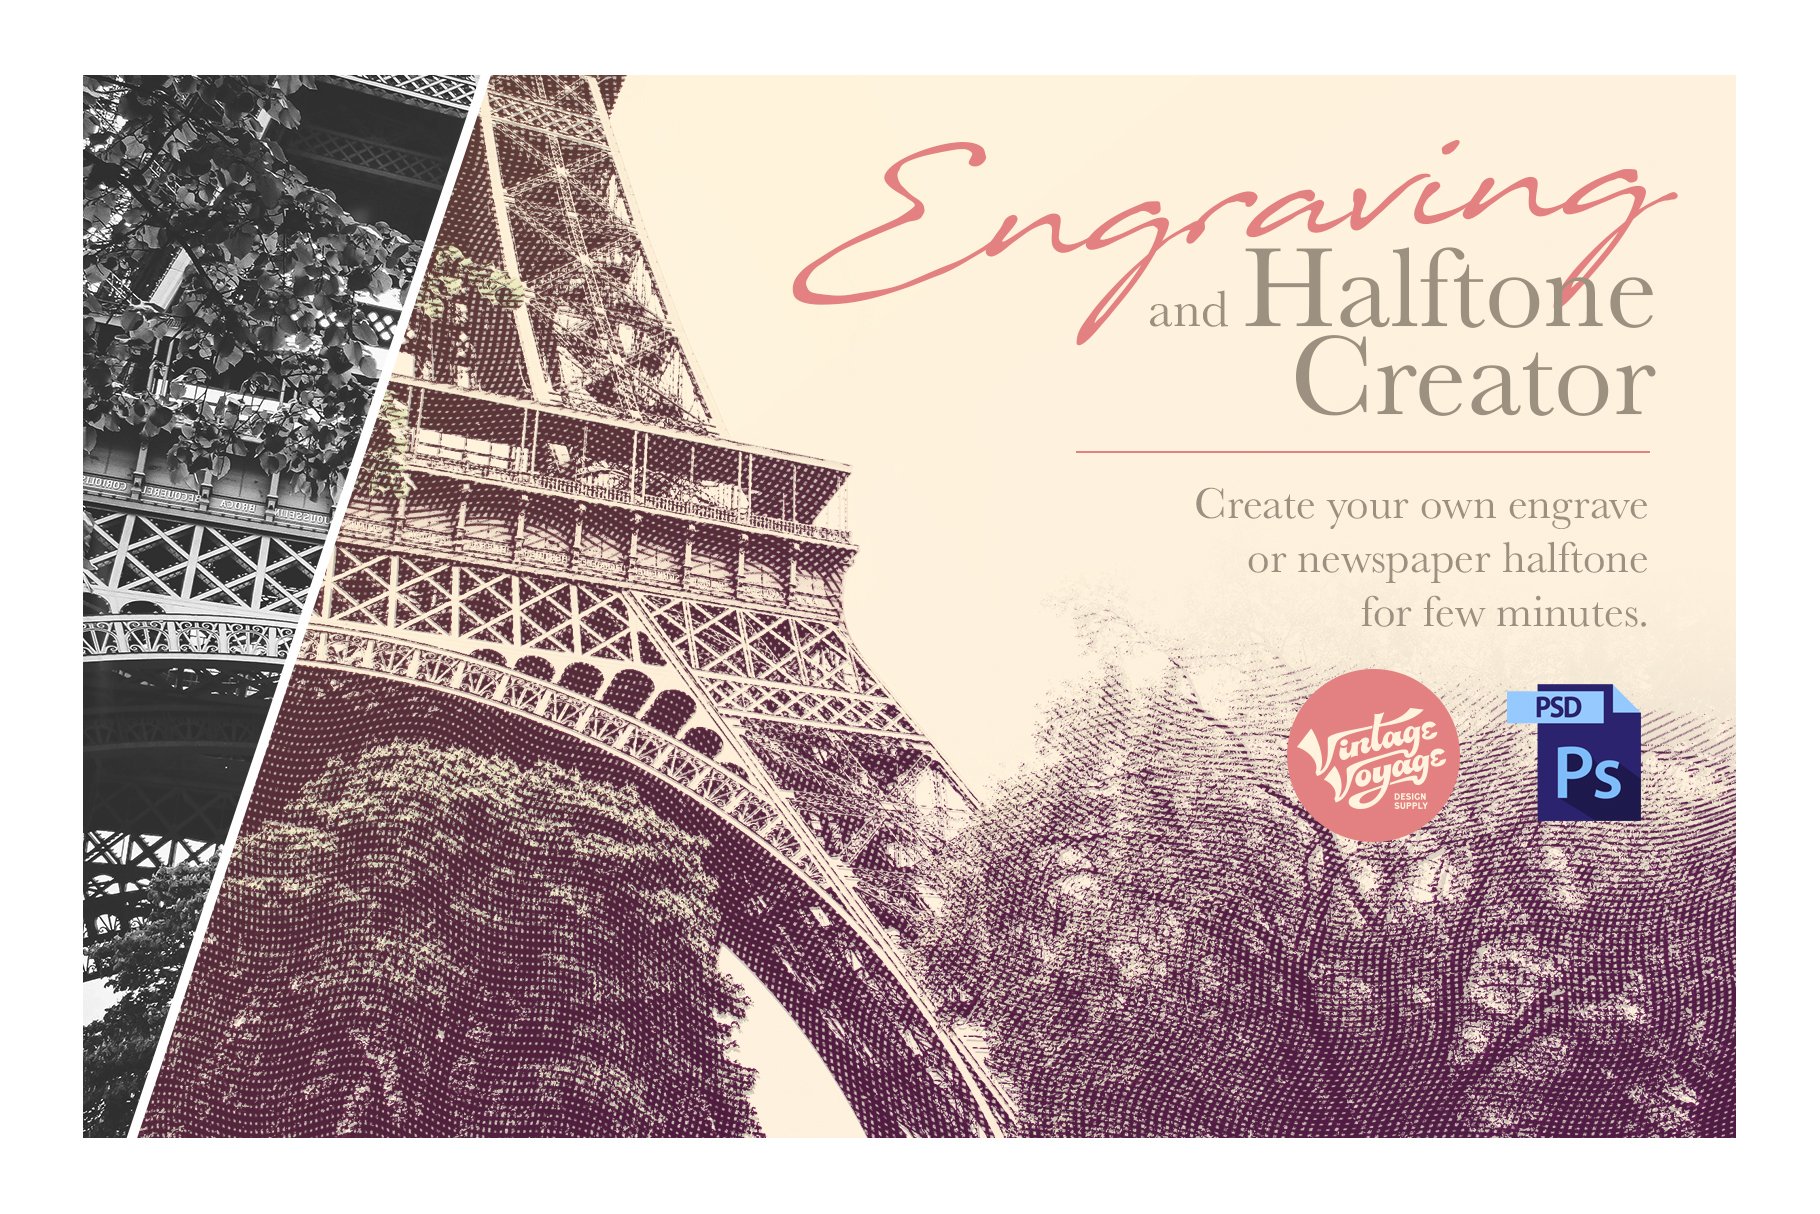 Engrave and Halftone Creatorpreview image.